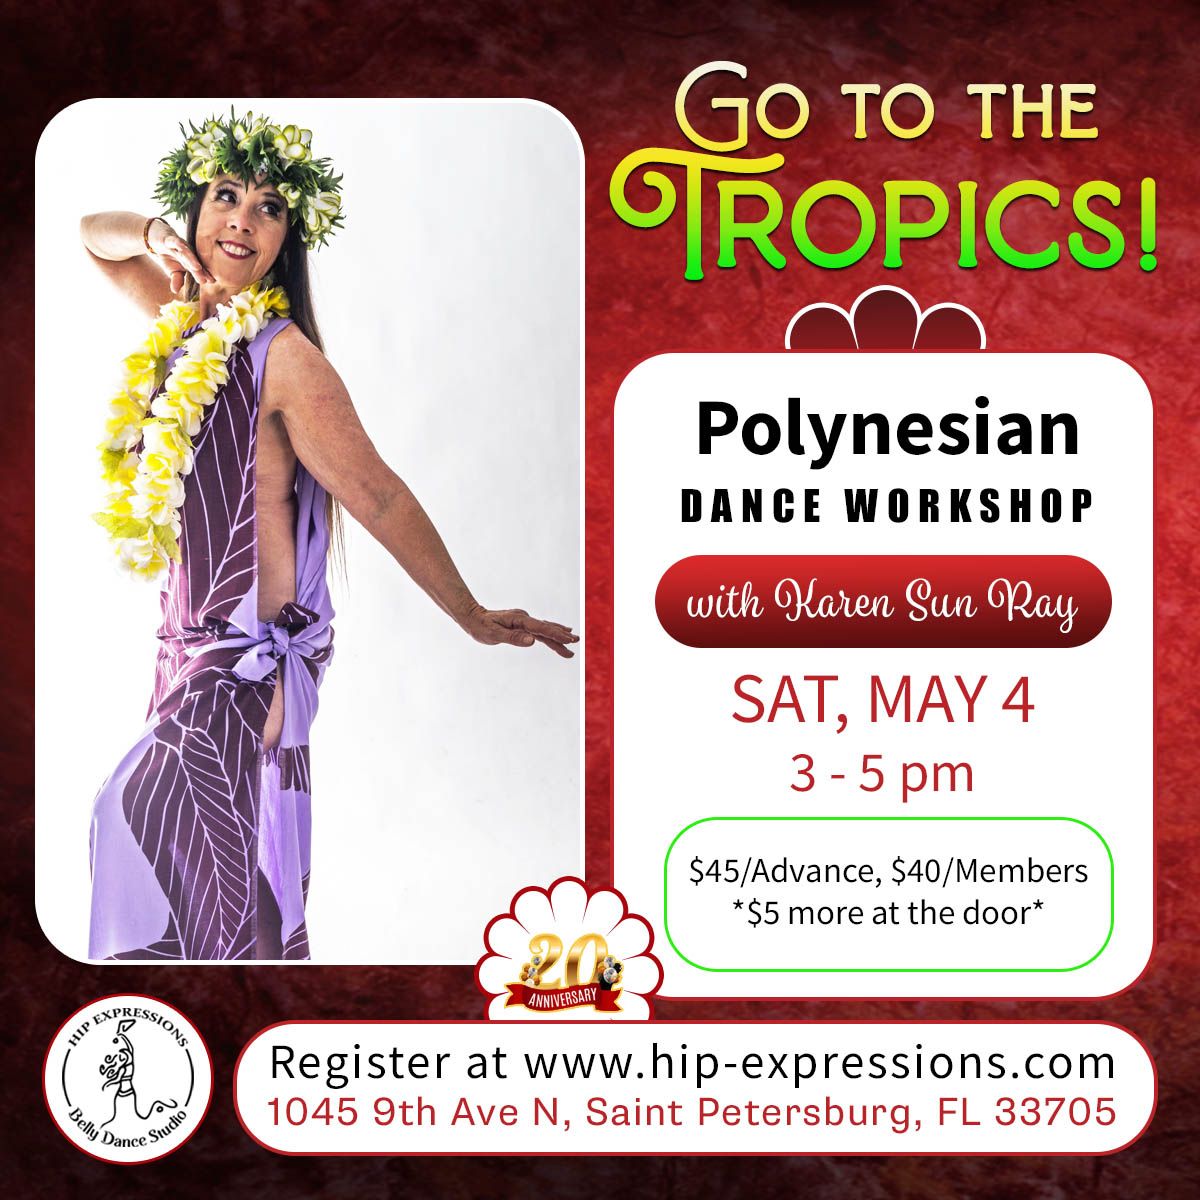 Polynesian Dance Workshop with Karen Sun Ray |  Sat, May 4th | 3 - 5 pm | At Hip Expressions